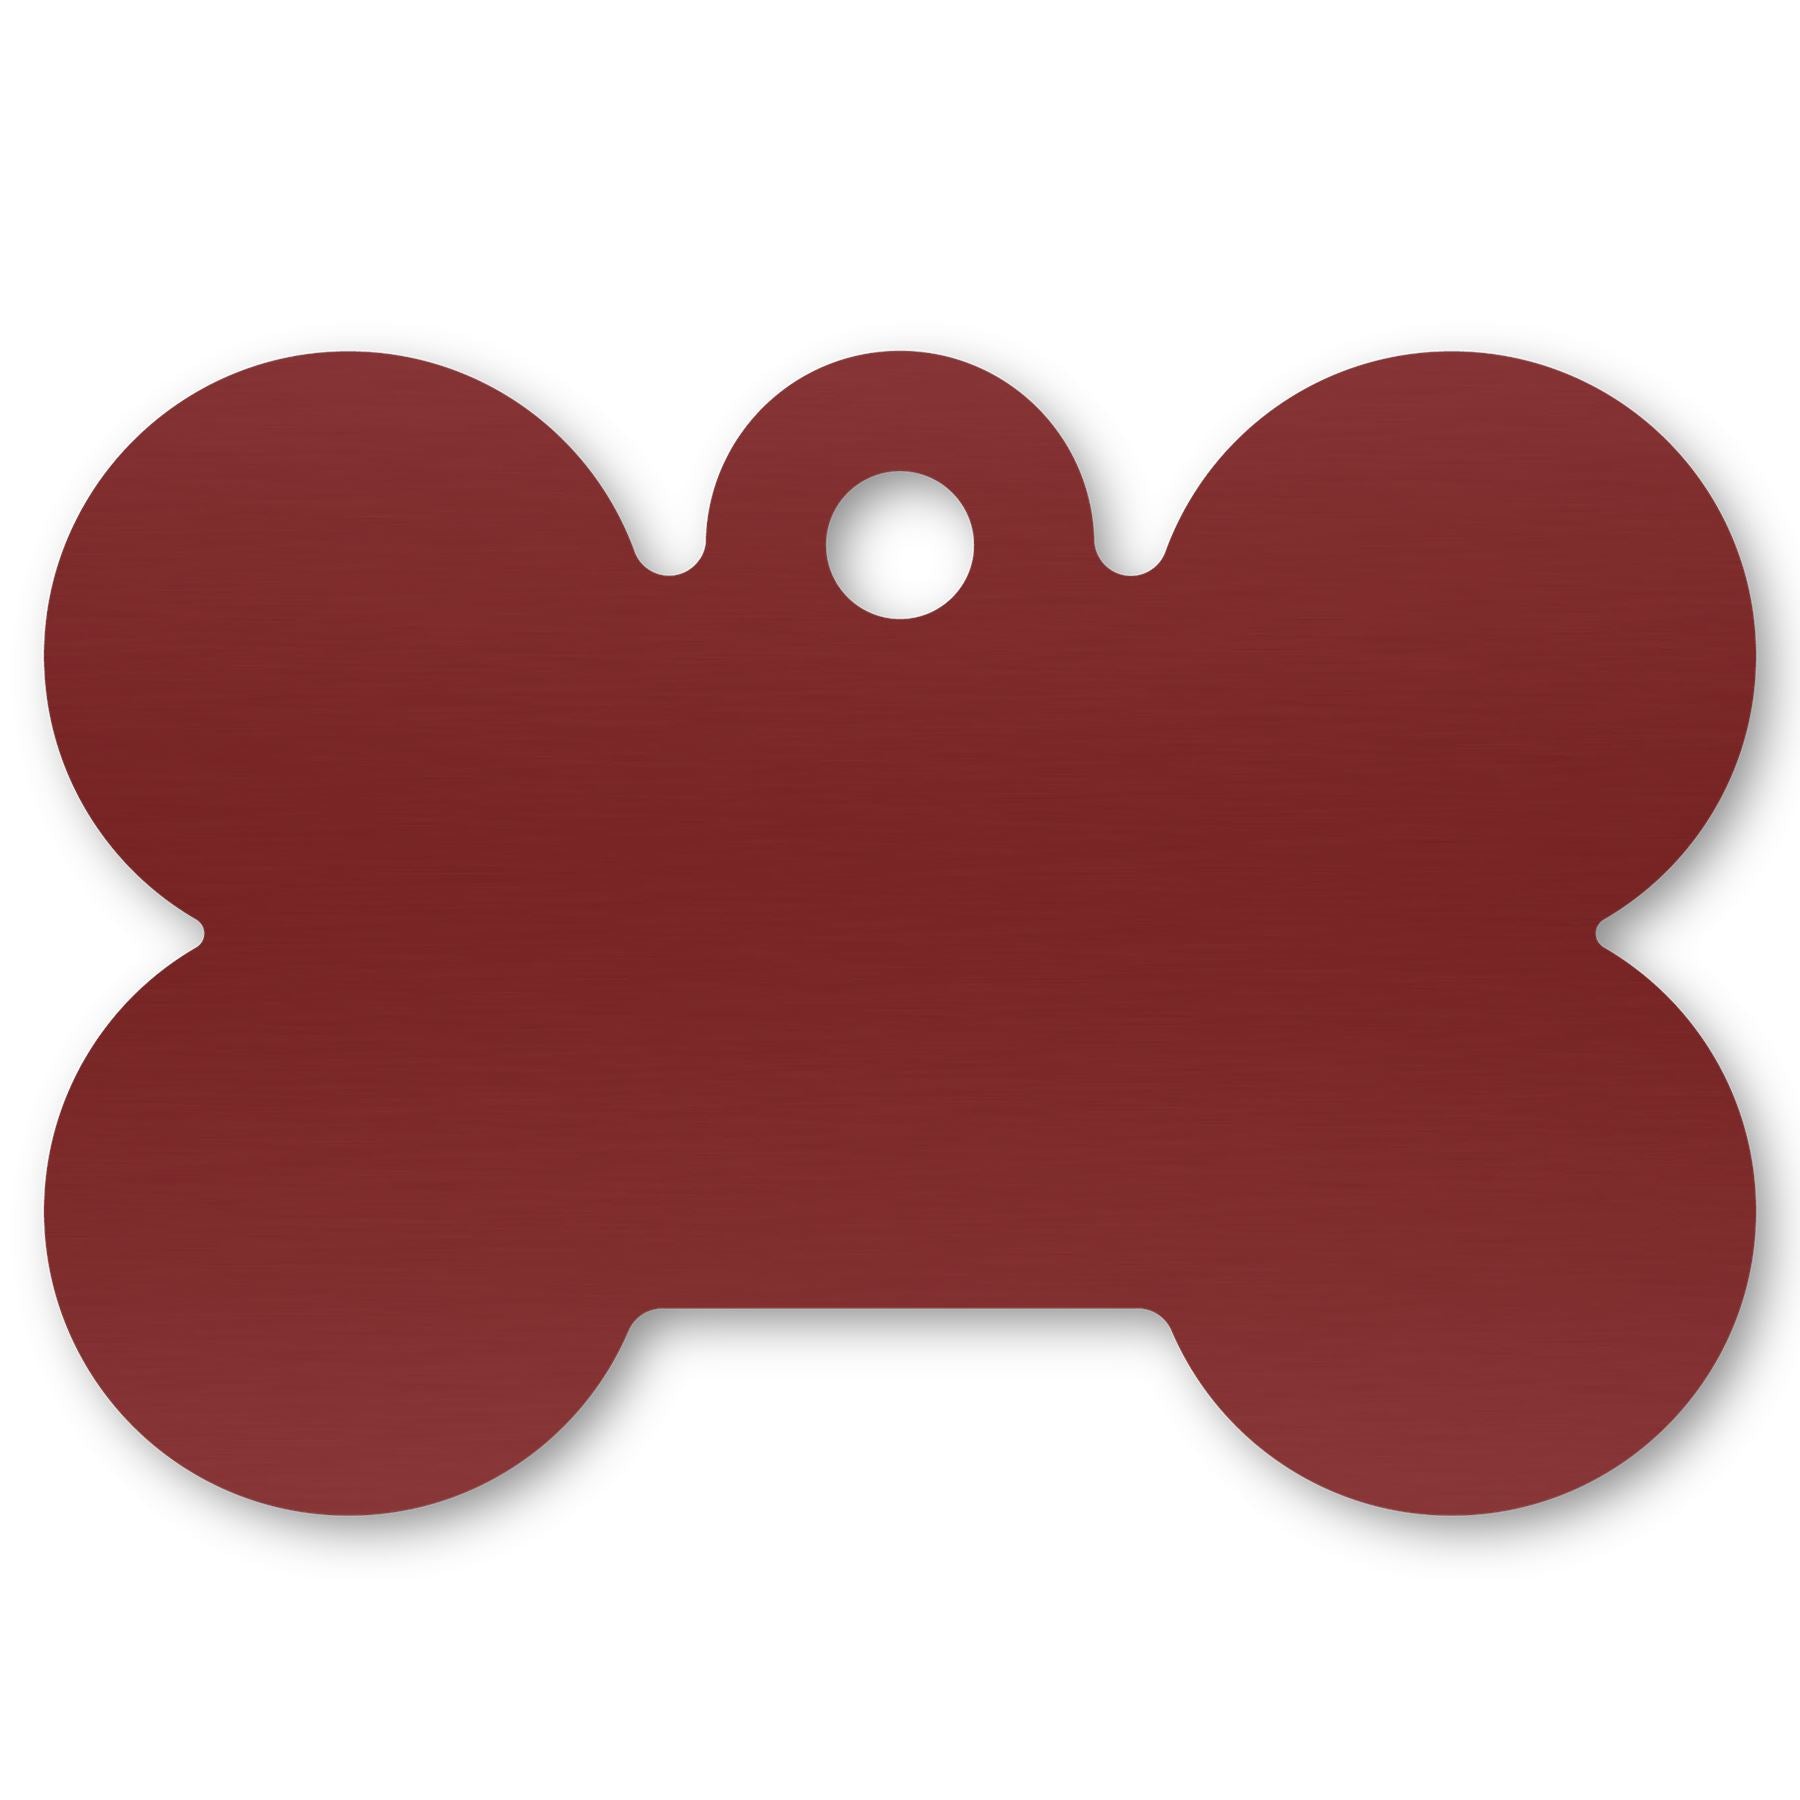 Anodized Aluminum Dog Bone Shaped Tags, 3/4" x 1-1/16" with 3/32" Hole, Laser Engraved Metal Tags Craftworks NW Red 